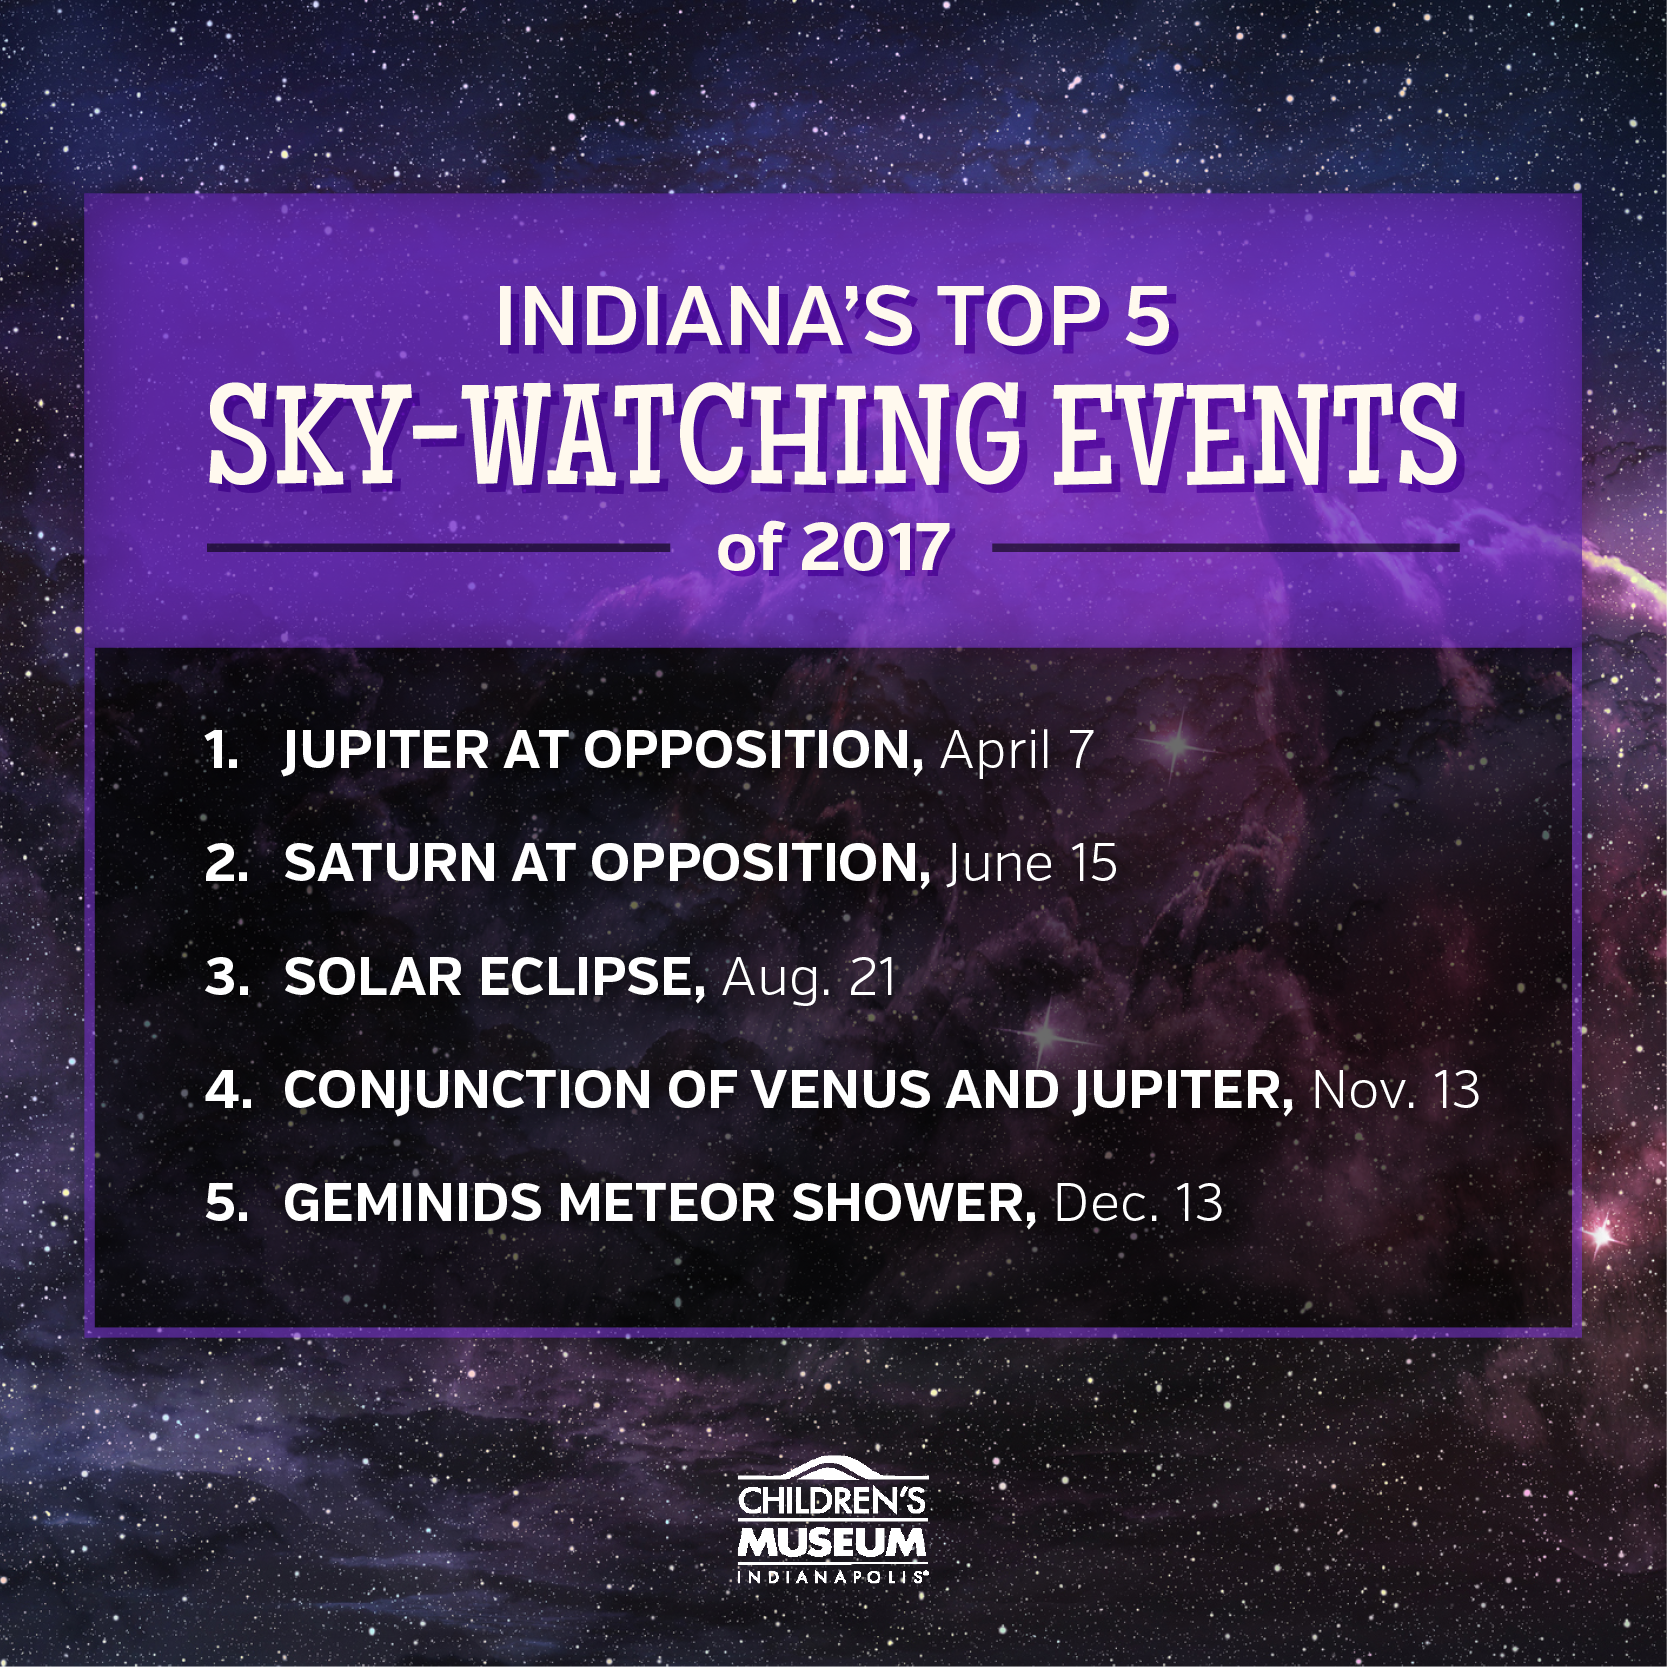 Top 5 Sky-watching Events for Indiana in 2017